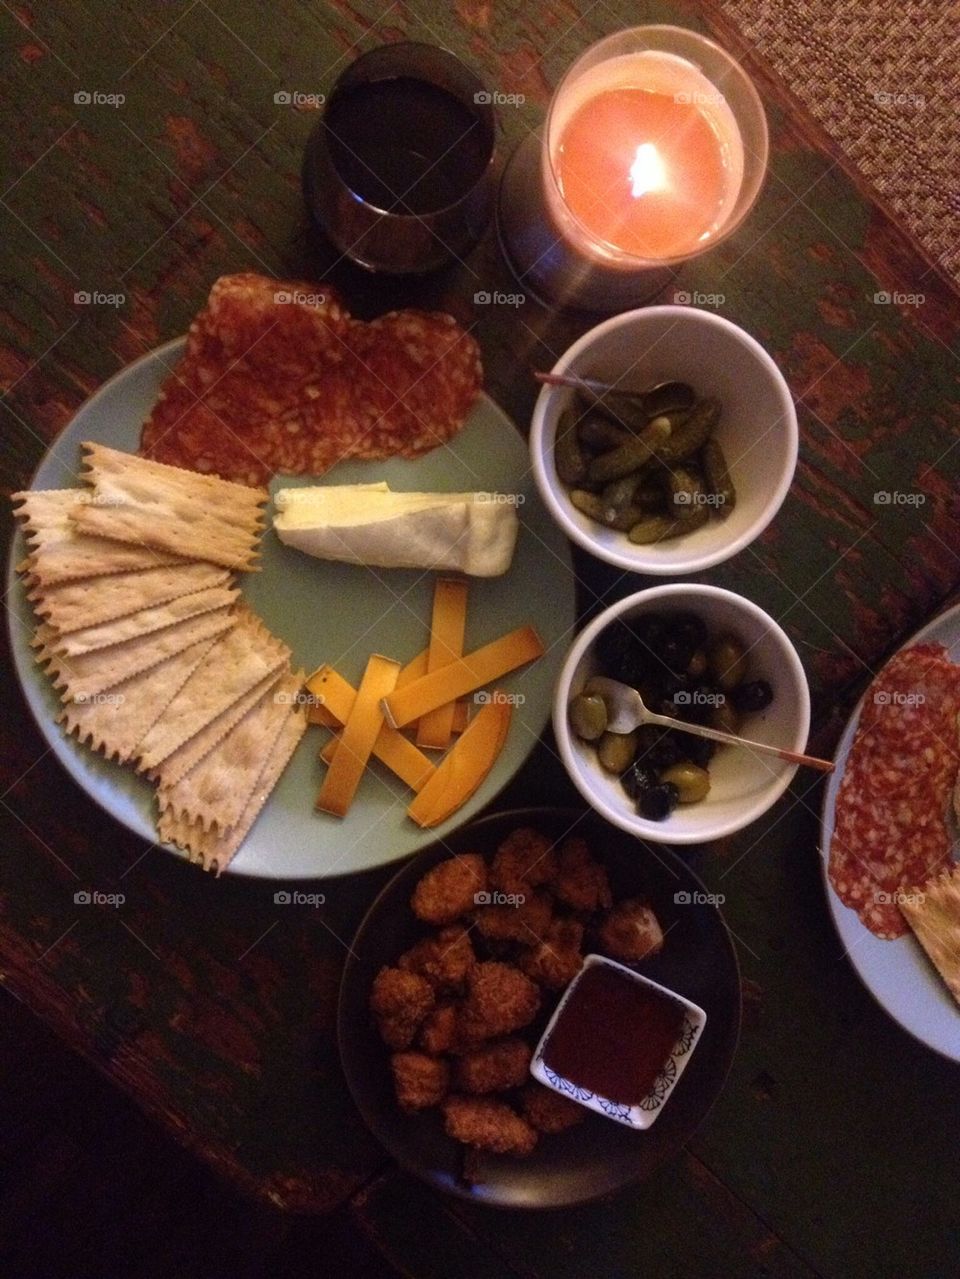 Meat and cheese plate with wine